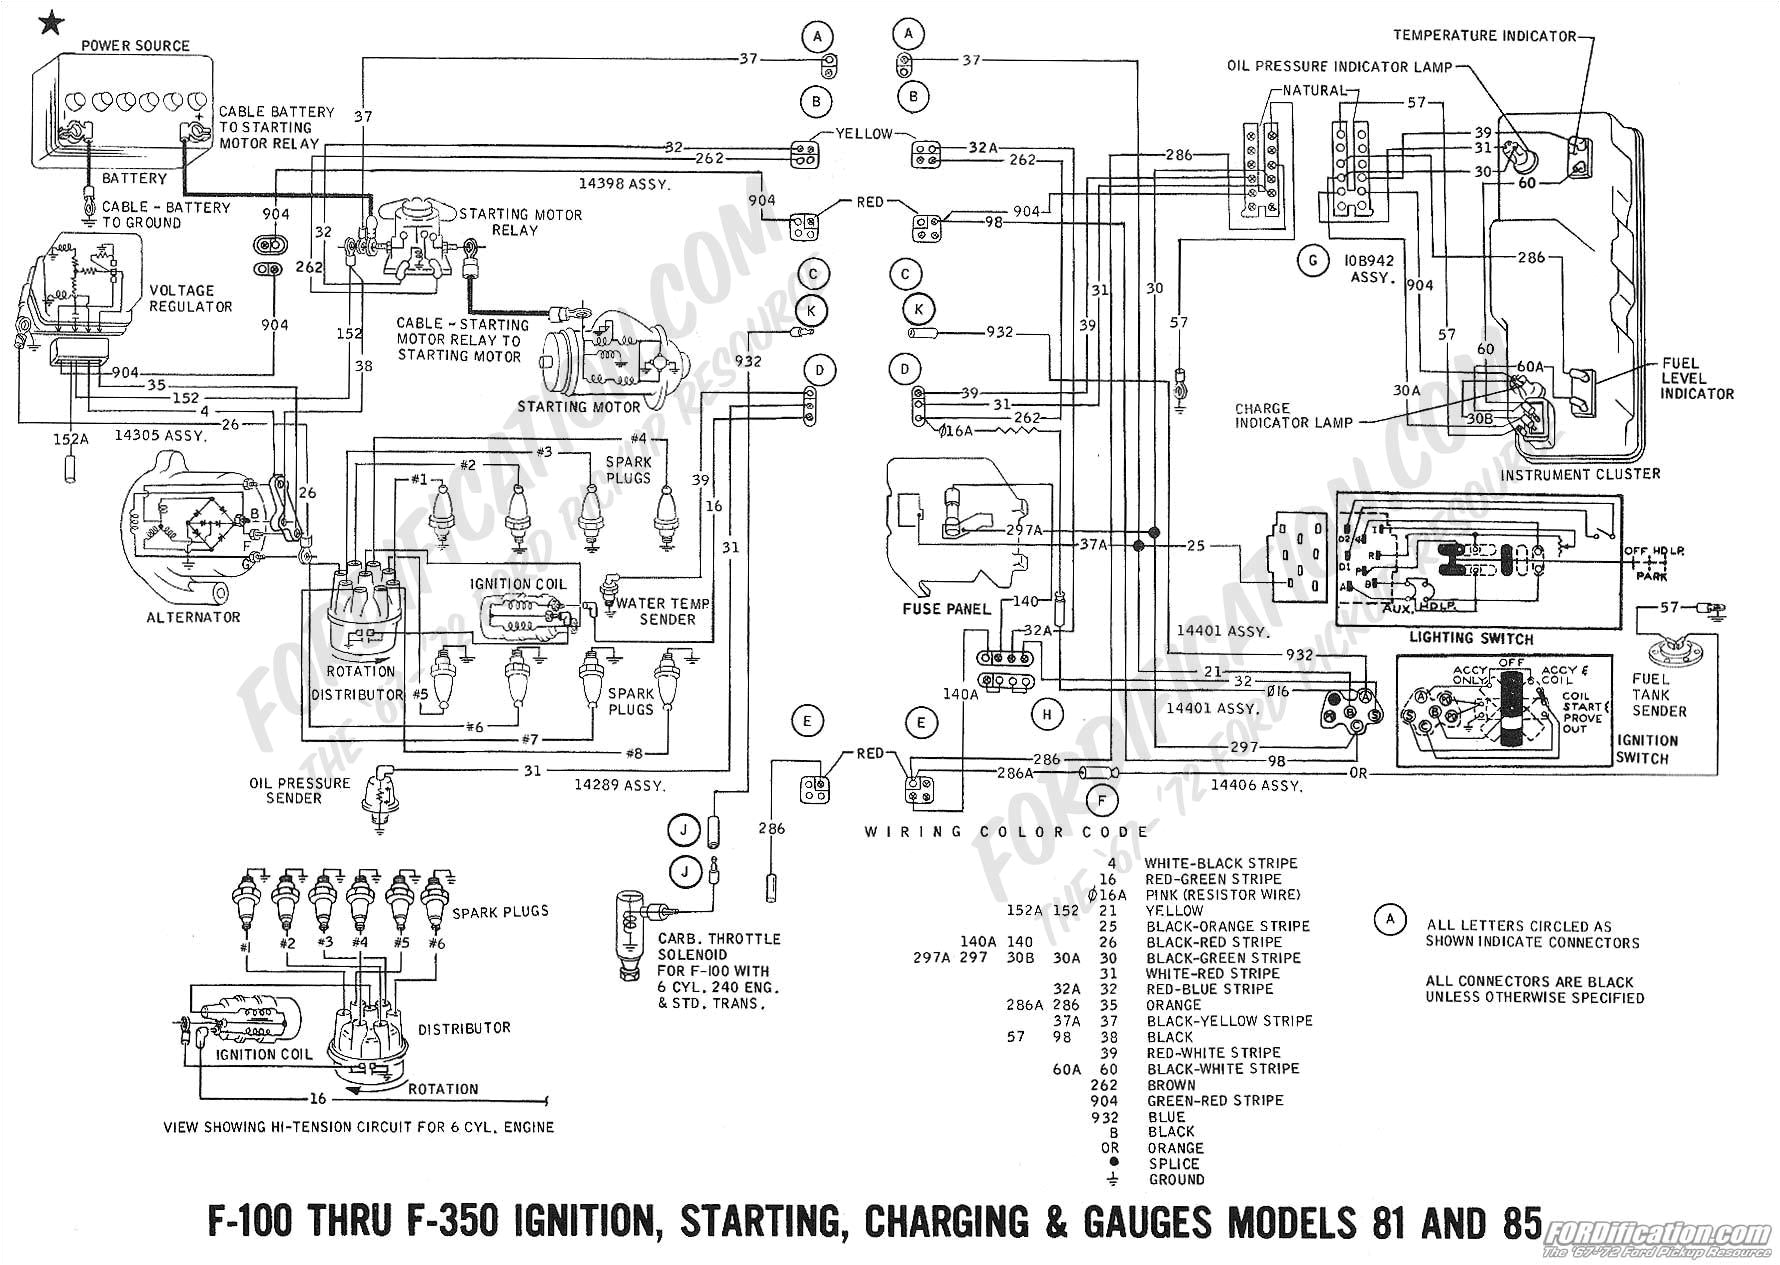 wiring diagram for 1989 ford f 350 get free image about wiring 1989 ford truck wiring harness